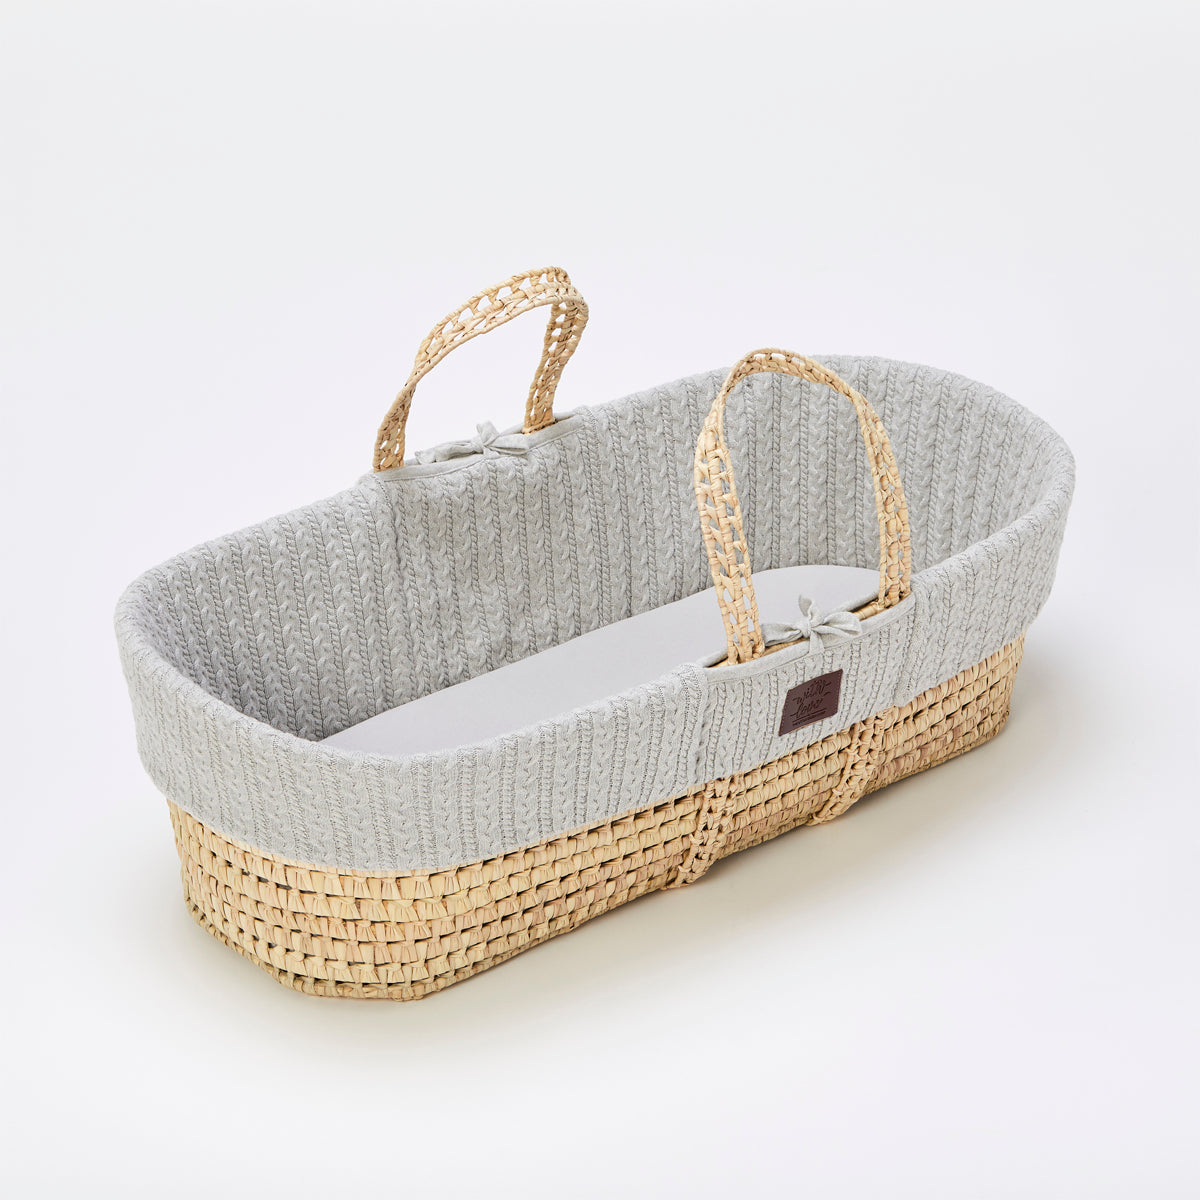 The Little Green Sheep Organic Knitted Moses Basket + Mattress- Dove